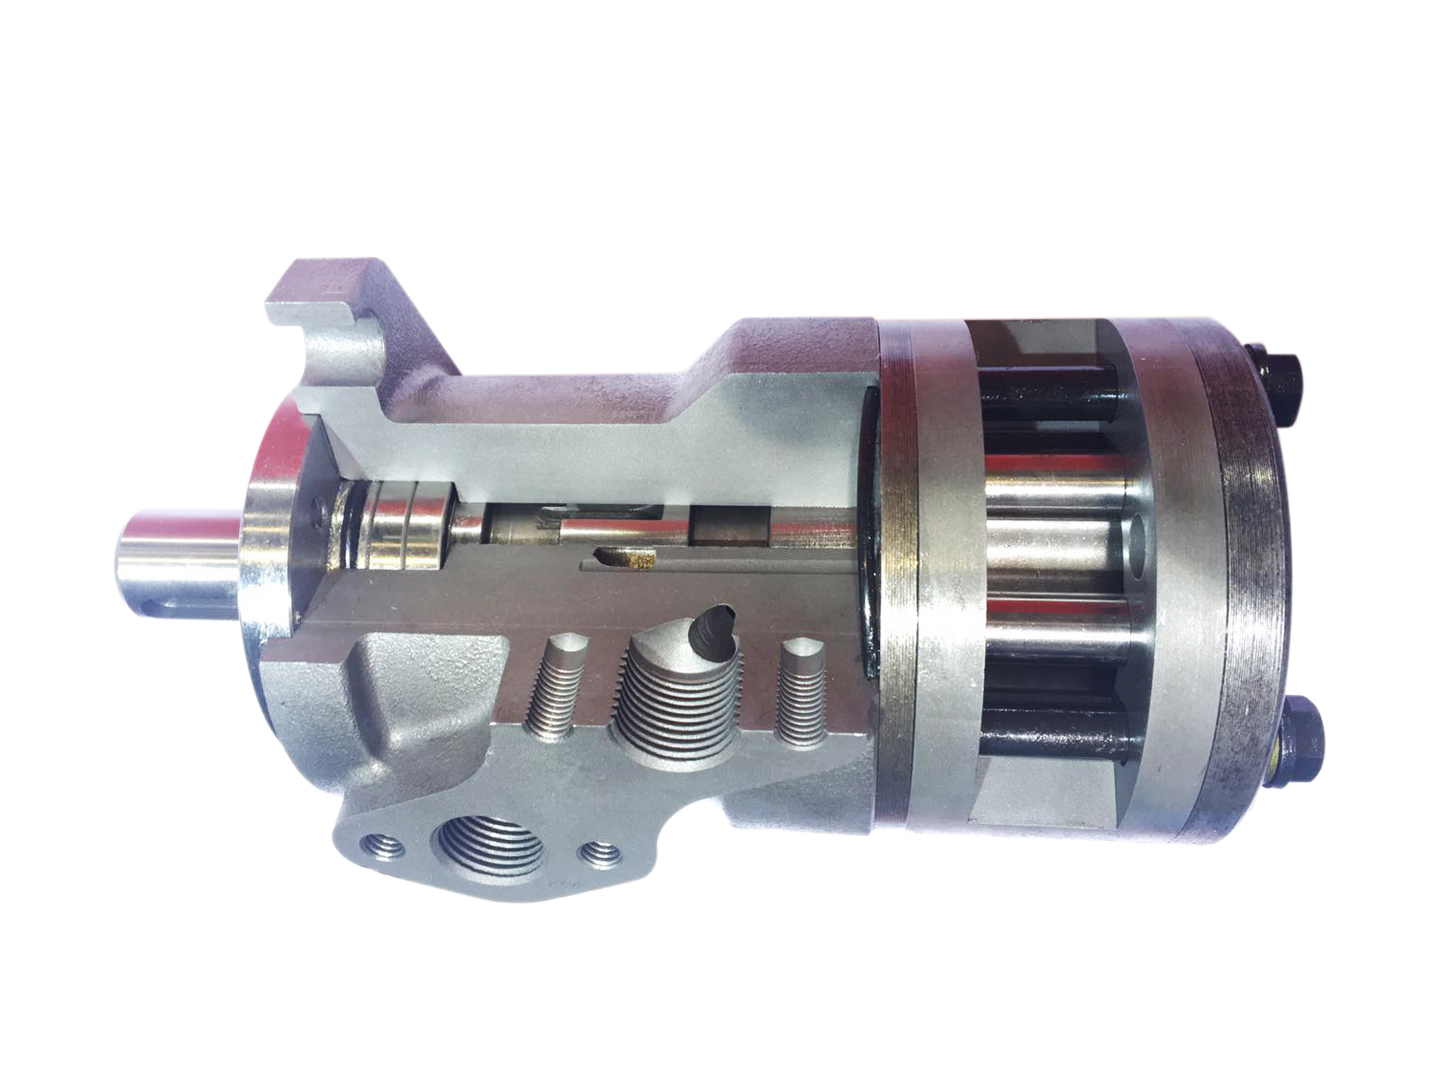 Hydraulic Motor Replacement for Danfoss OMP series, 2-Bolt Mounting Flange ,G1/2 NPT Ports